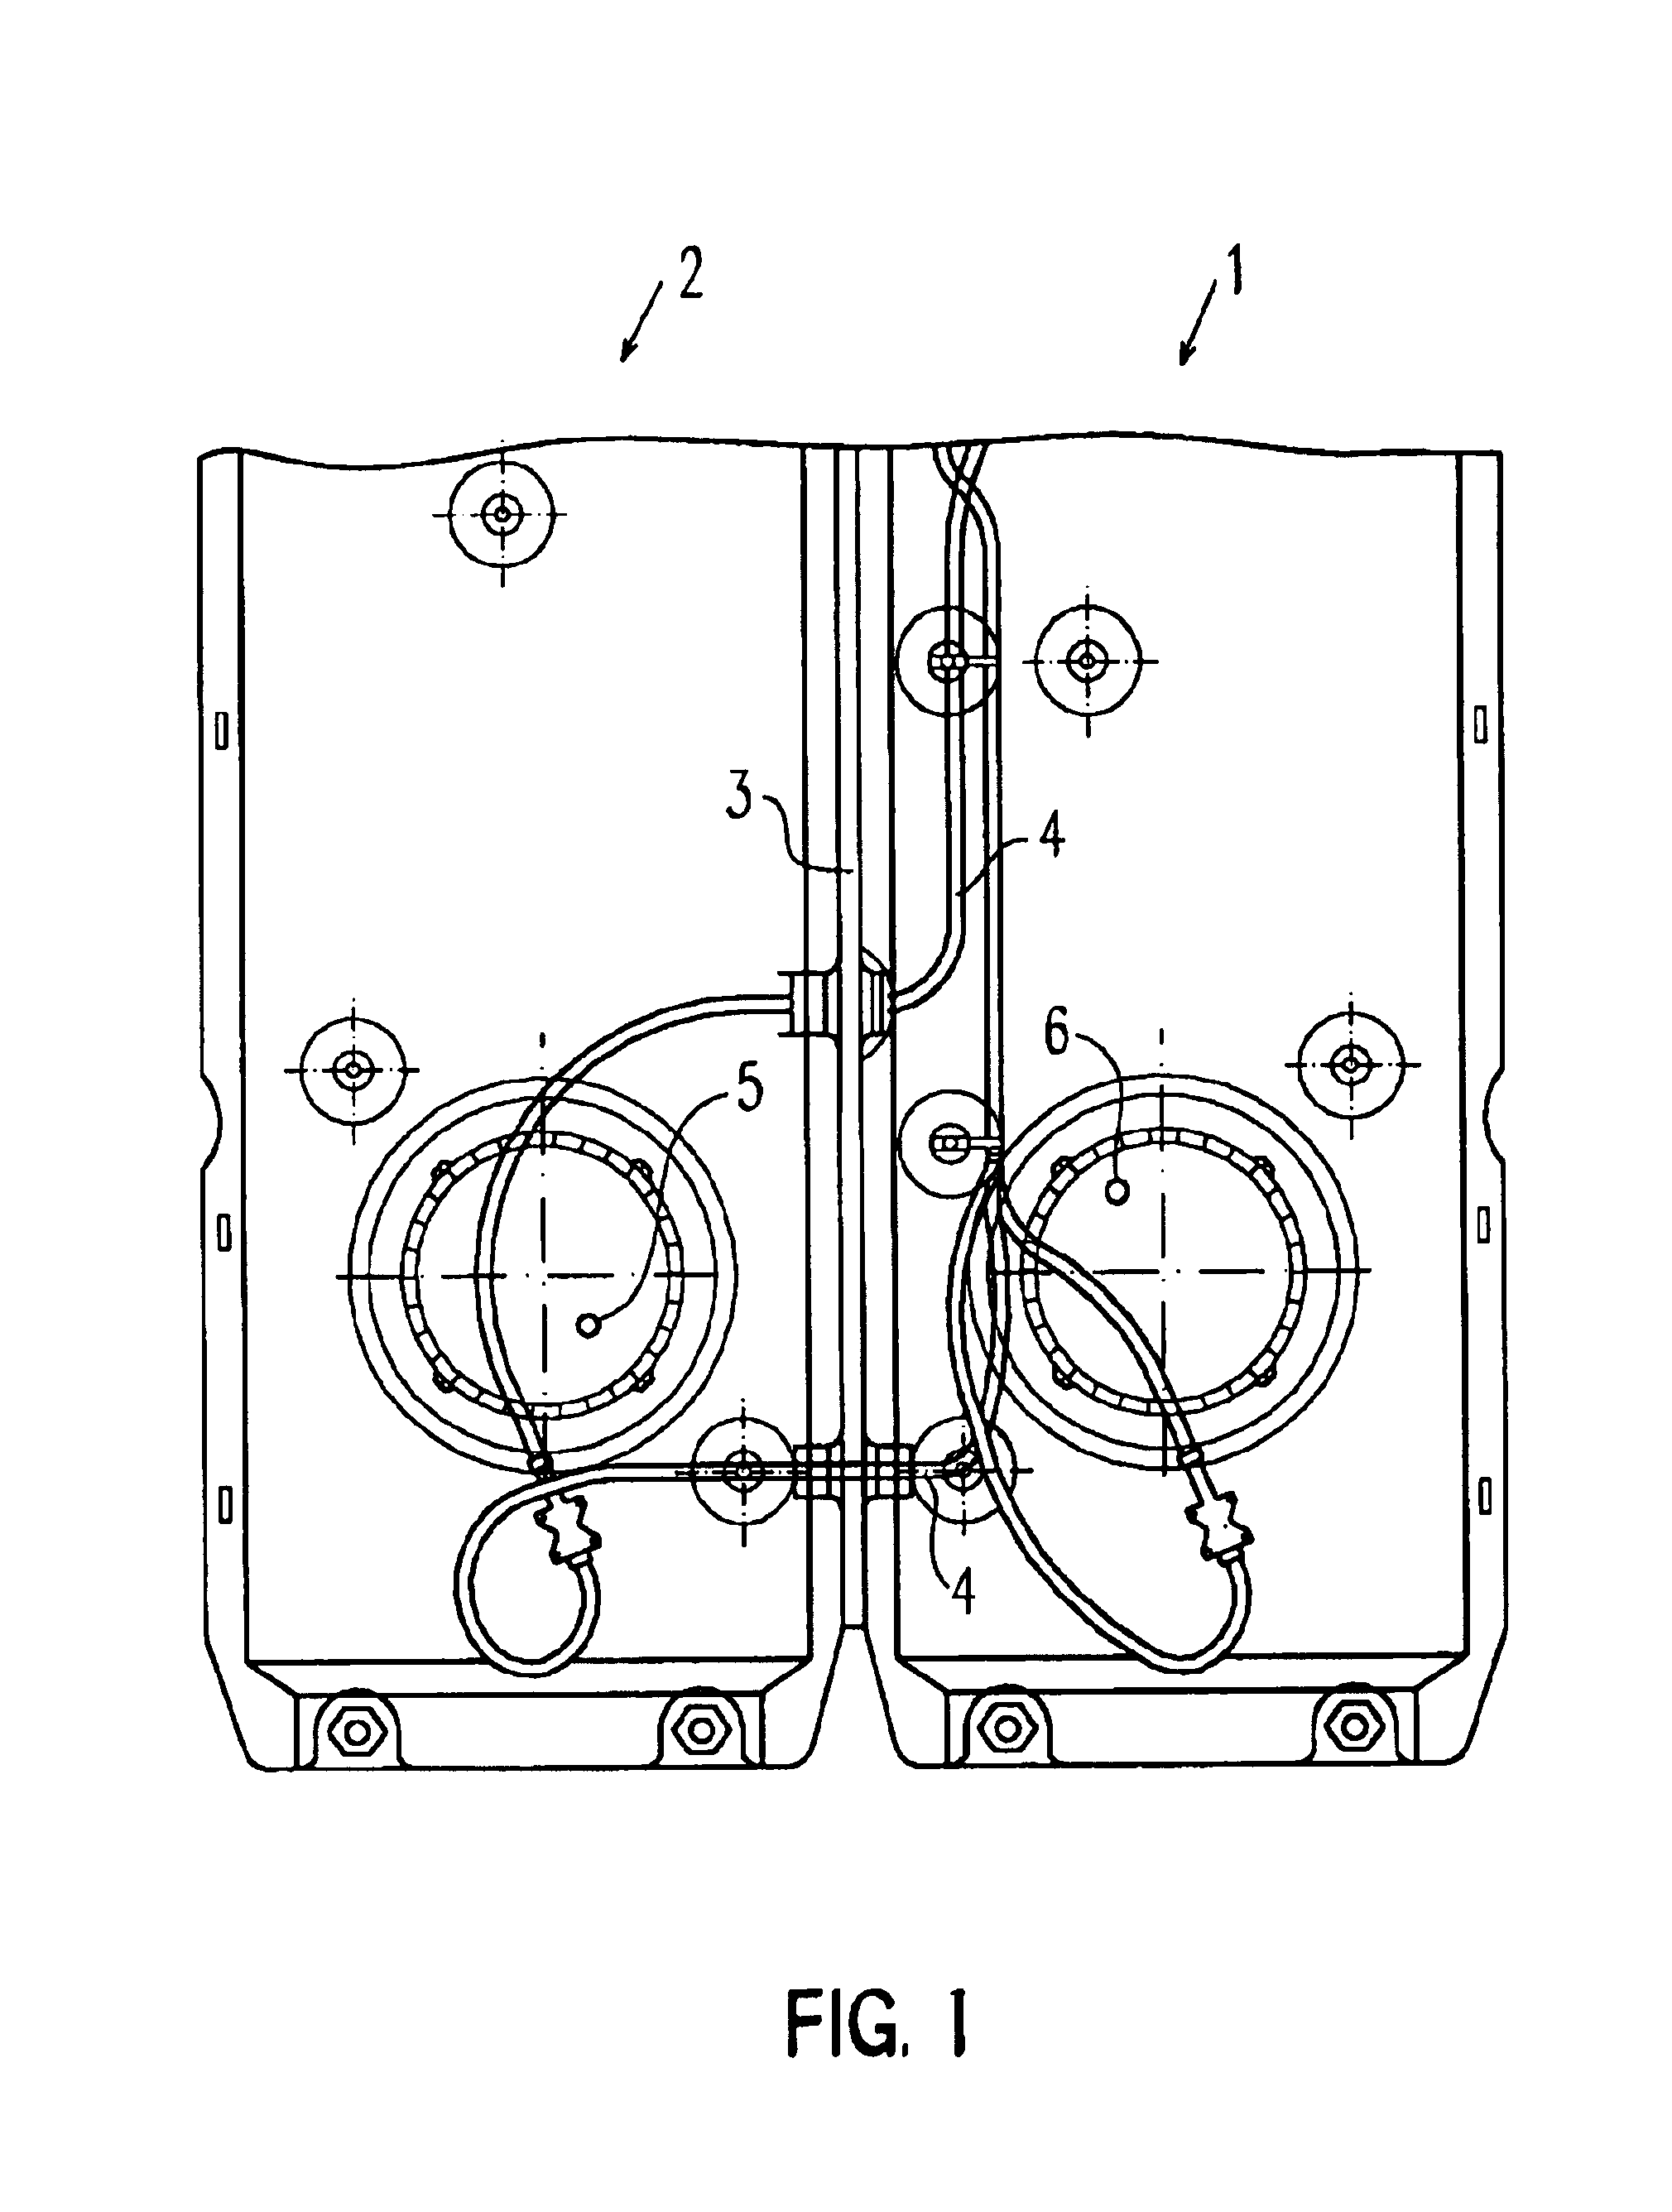 Connection arrangement to connect two flexible tanks of an aircraft